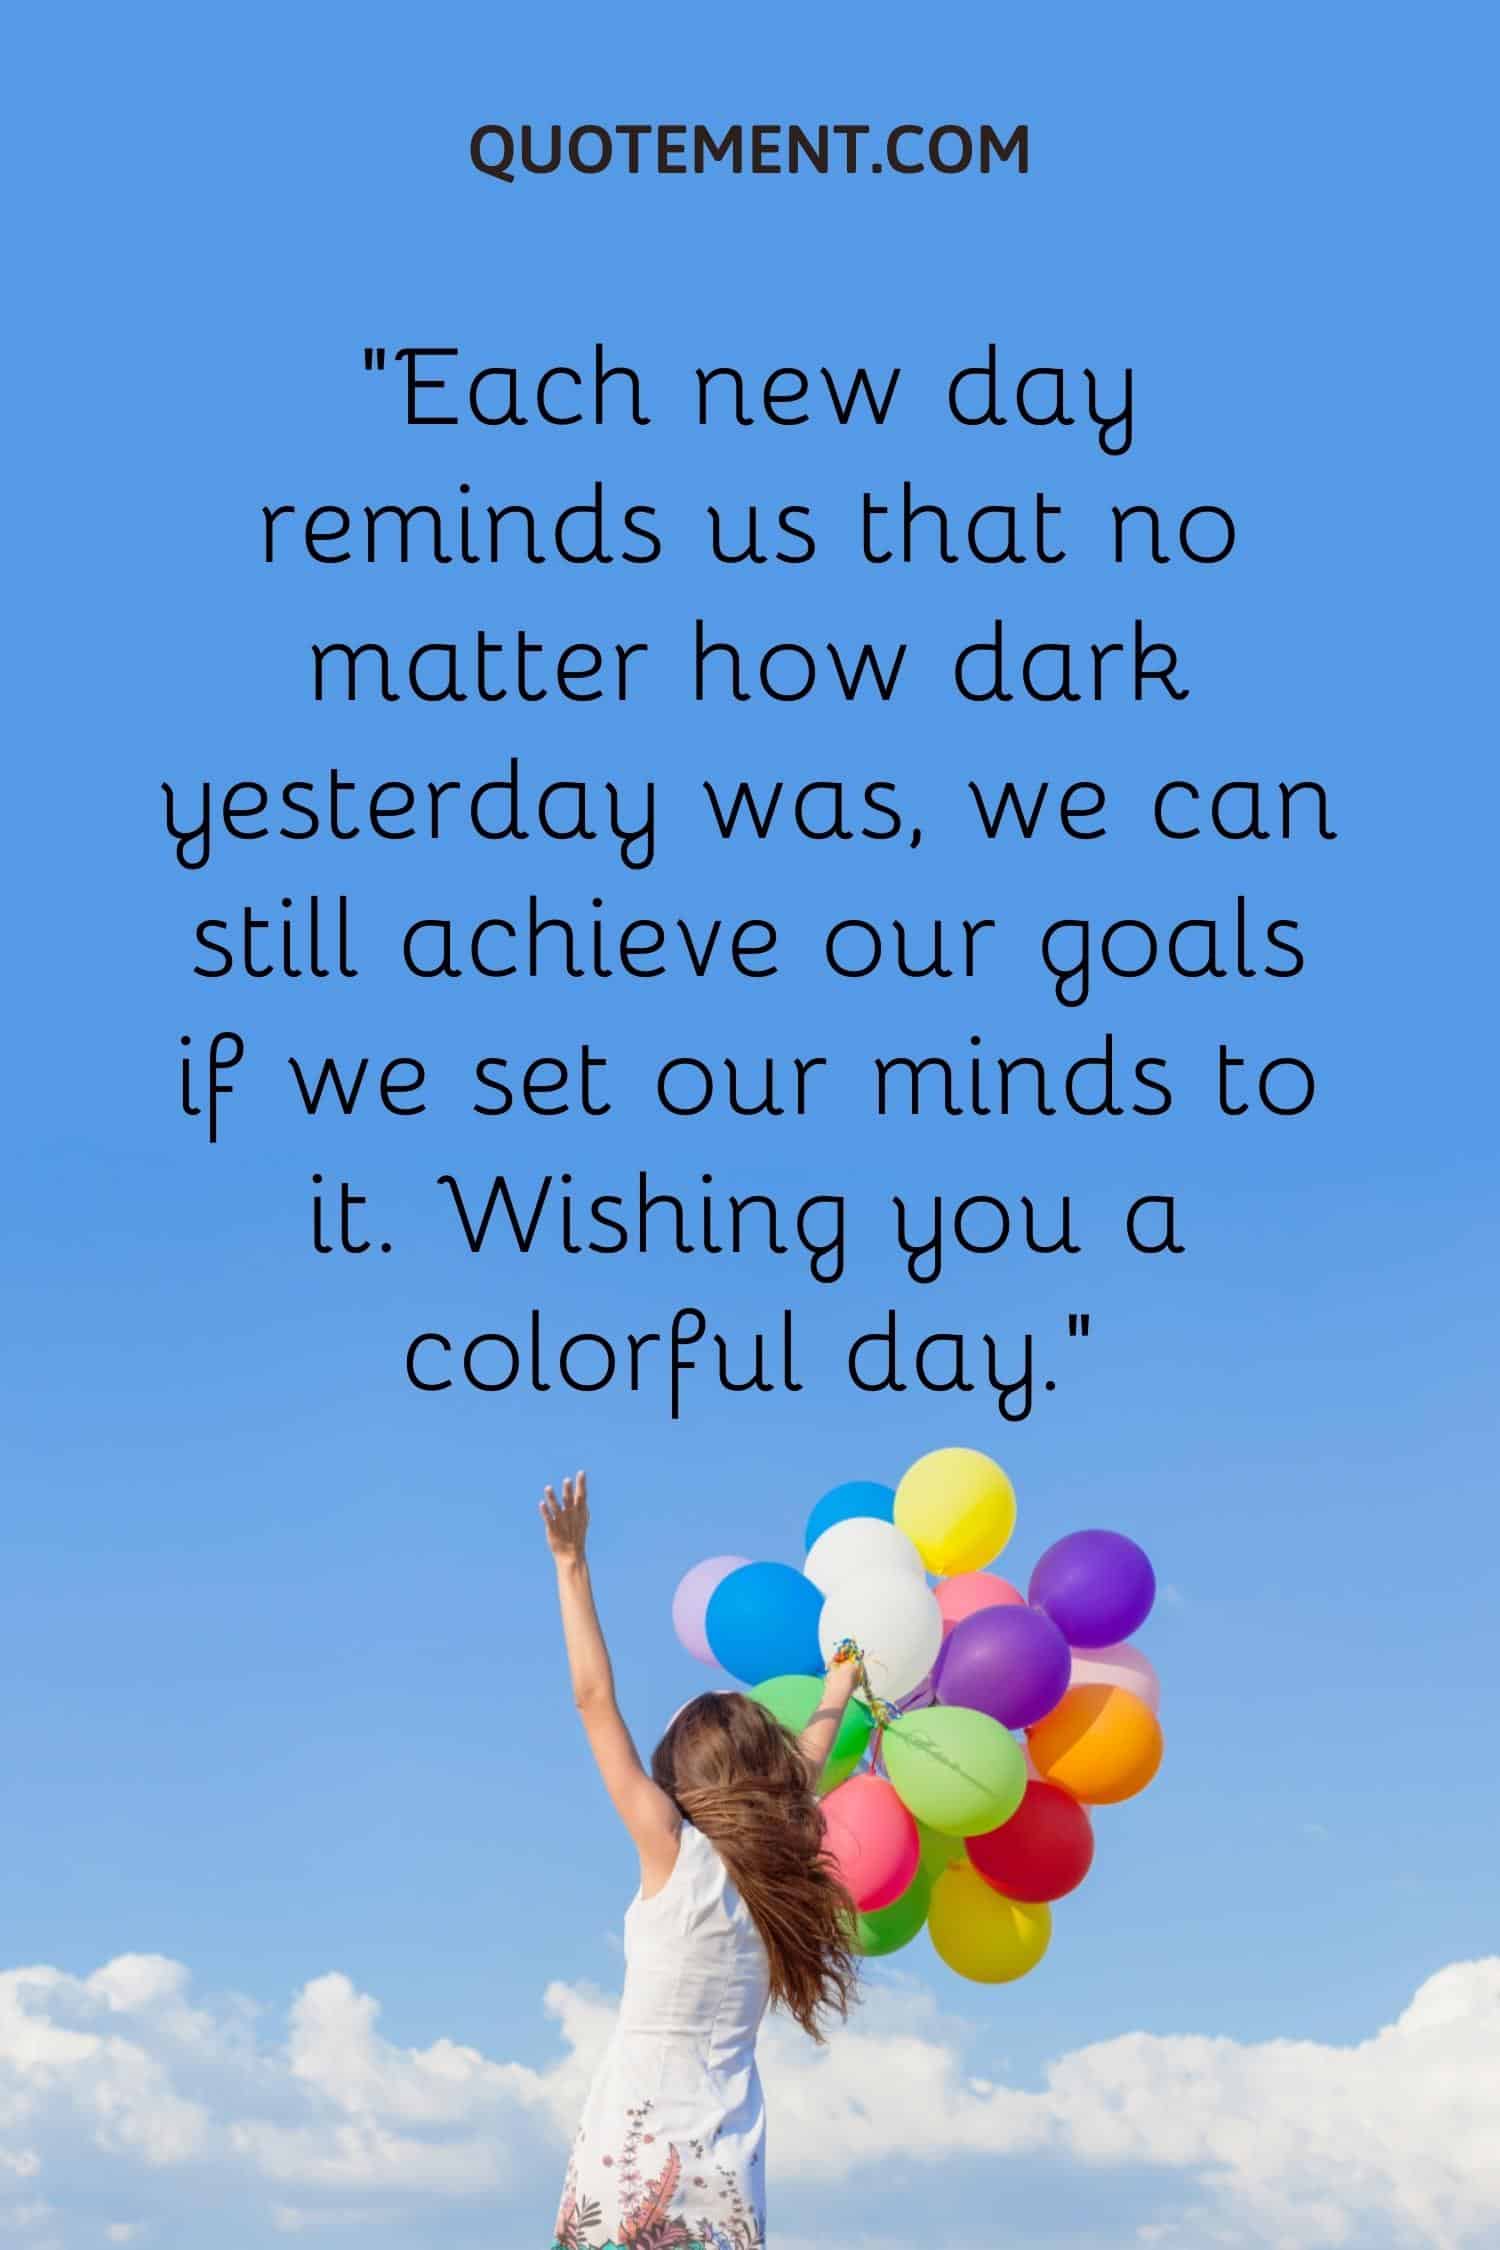 Each new day reminds us that no matter how dark yesterday was, we can still achieve our goals if we set our minds to it